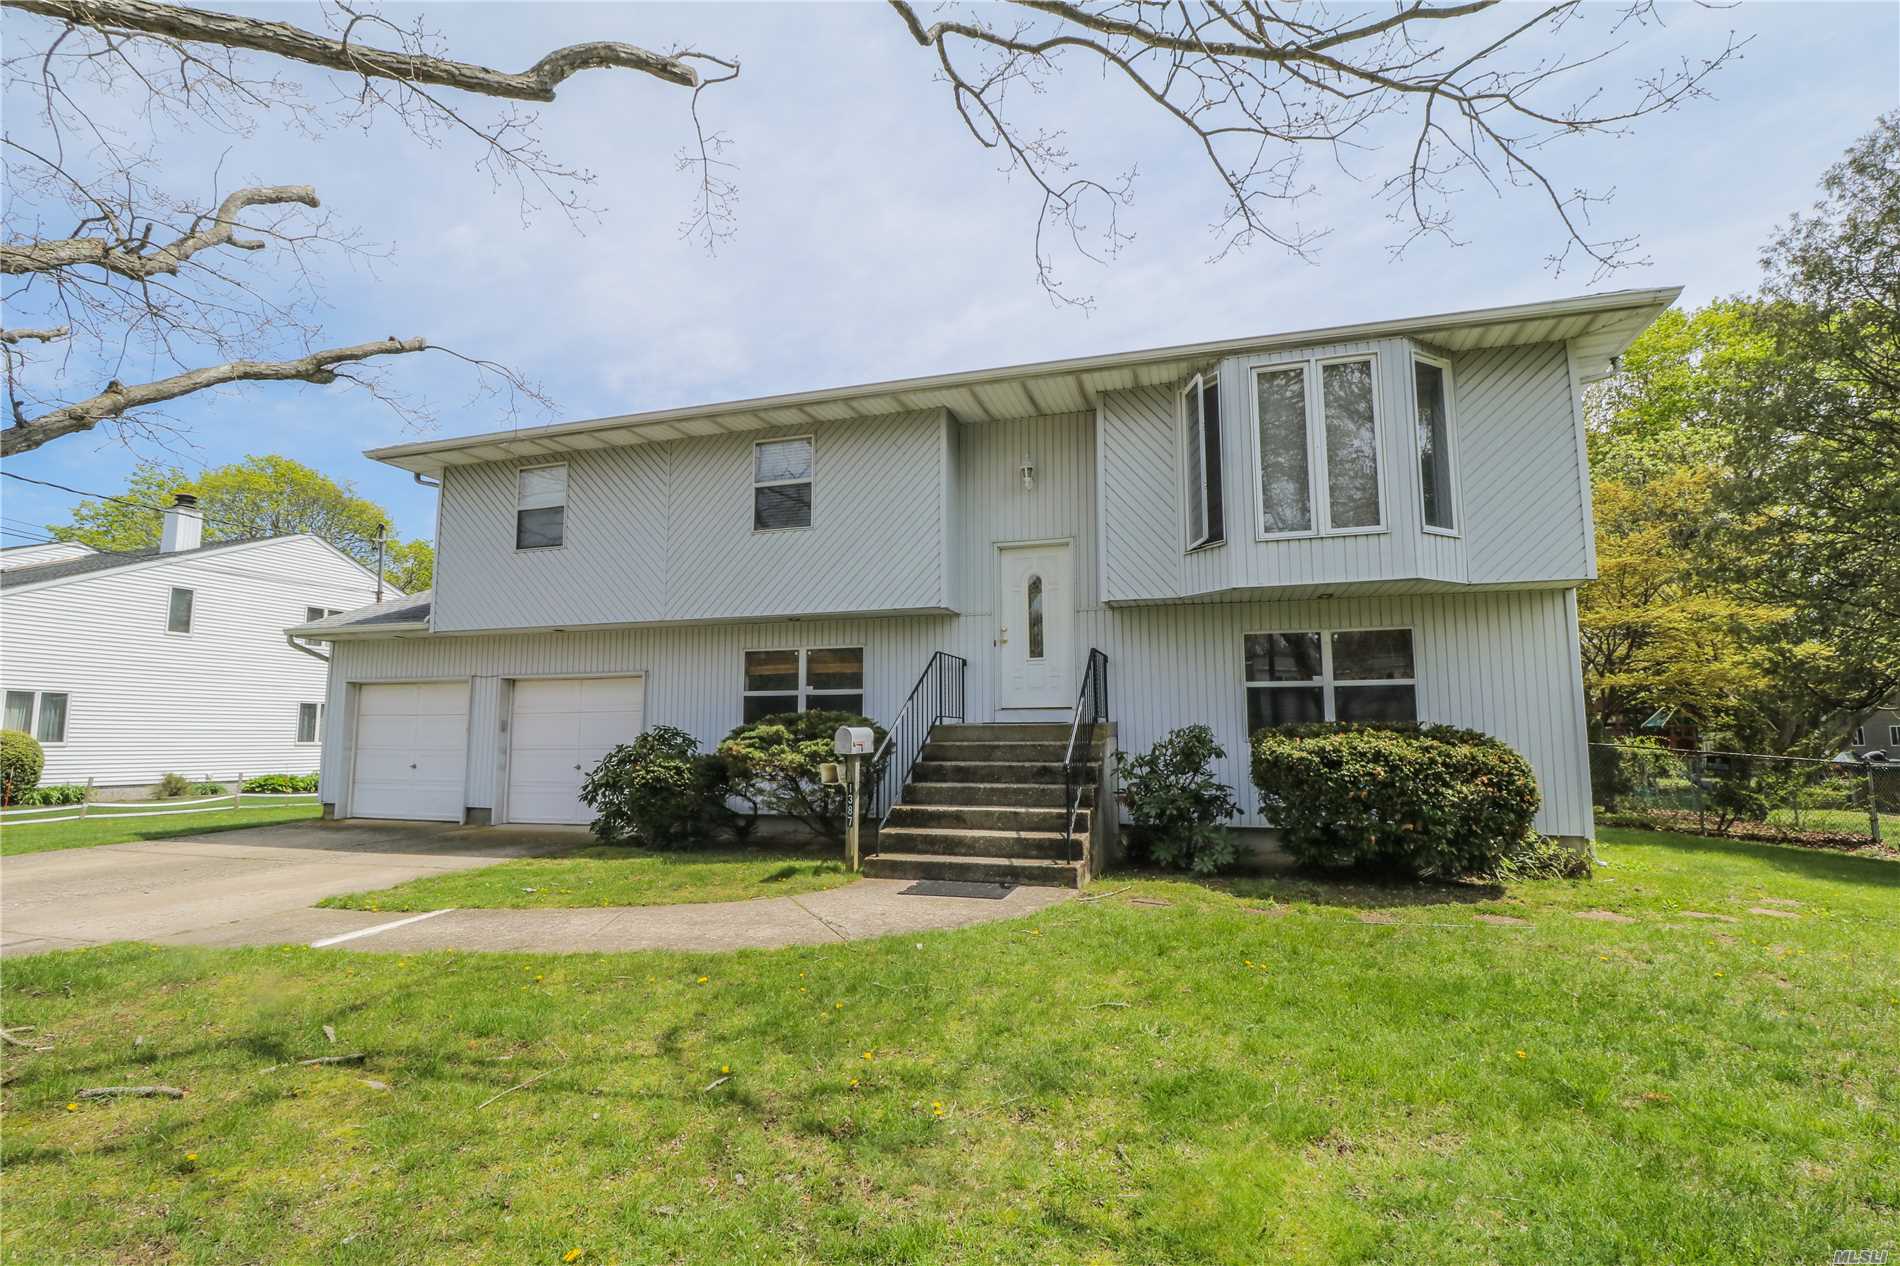 Great Hi Ranch on Large lot in Bay Shore Schools Featuring 3 bedrooms, hardwood floors, living room, dining room and large kitchen, Full Bath, upstairs. Downstairs full bath, 2bedrooms , den , laundry indoor access for the 2 car garage. Sliders to the huge backyard.